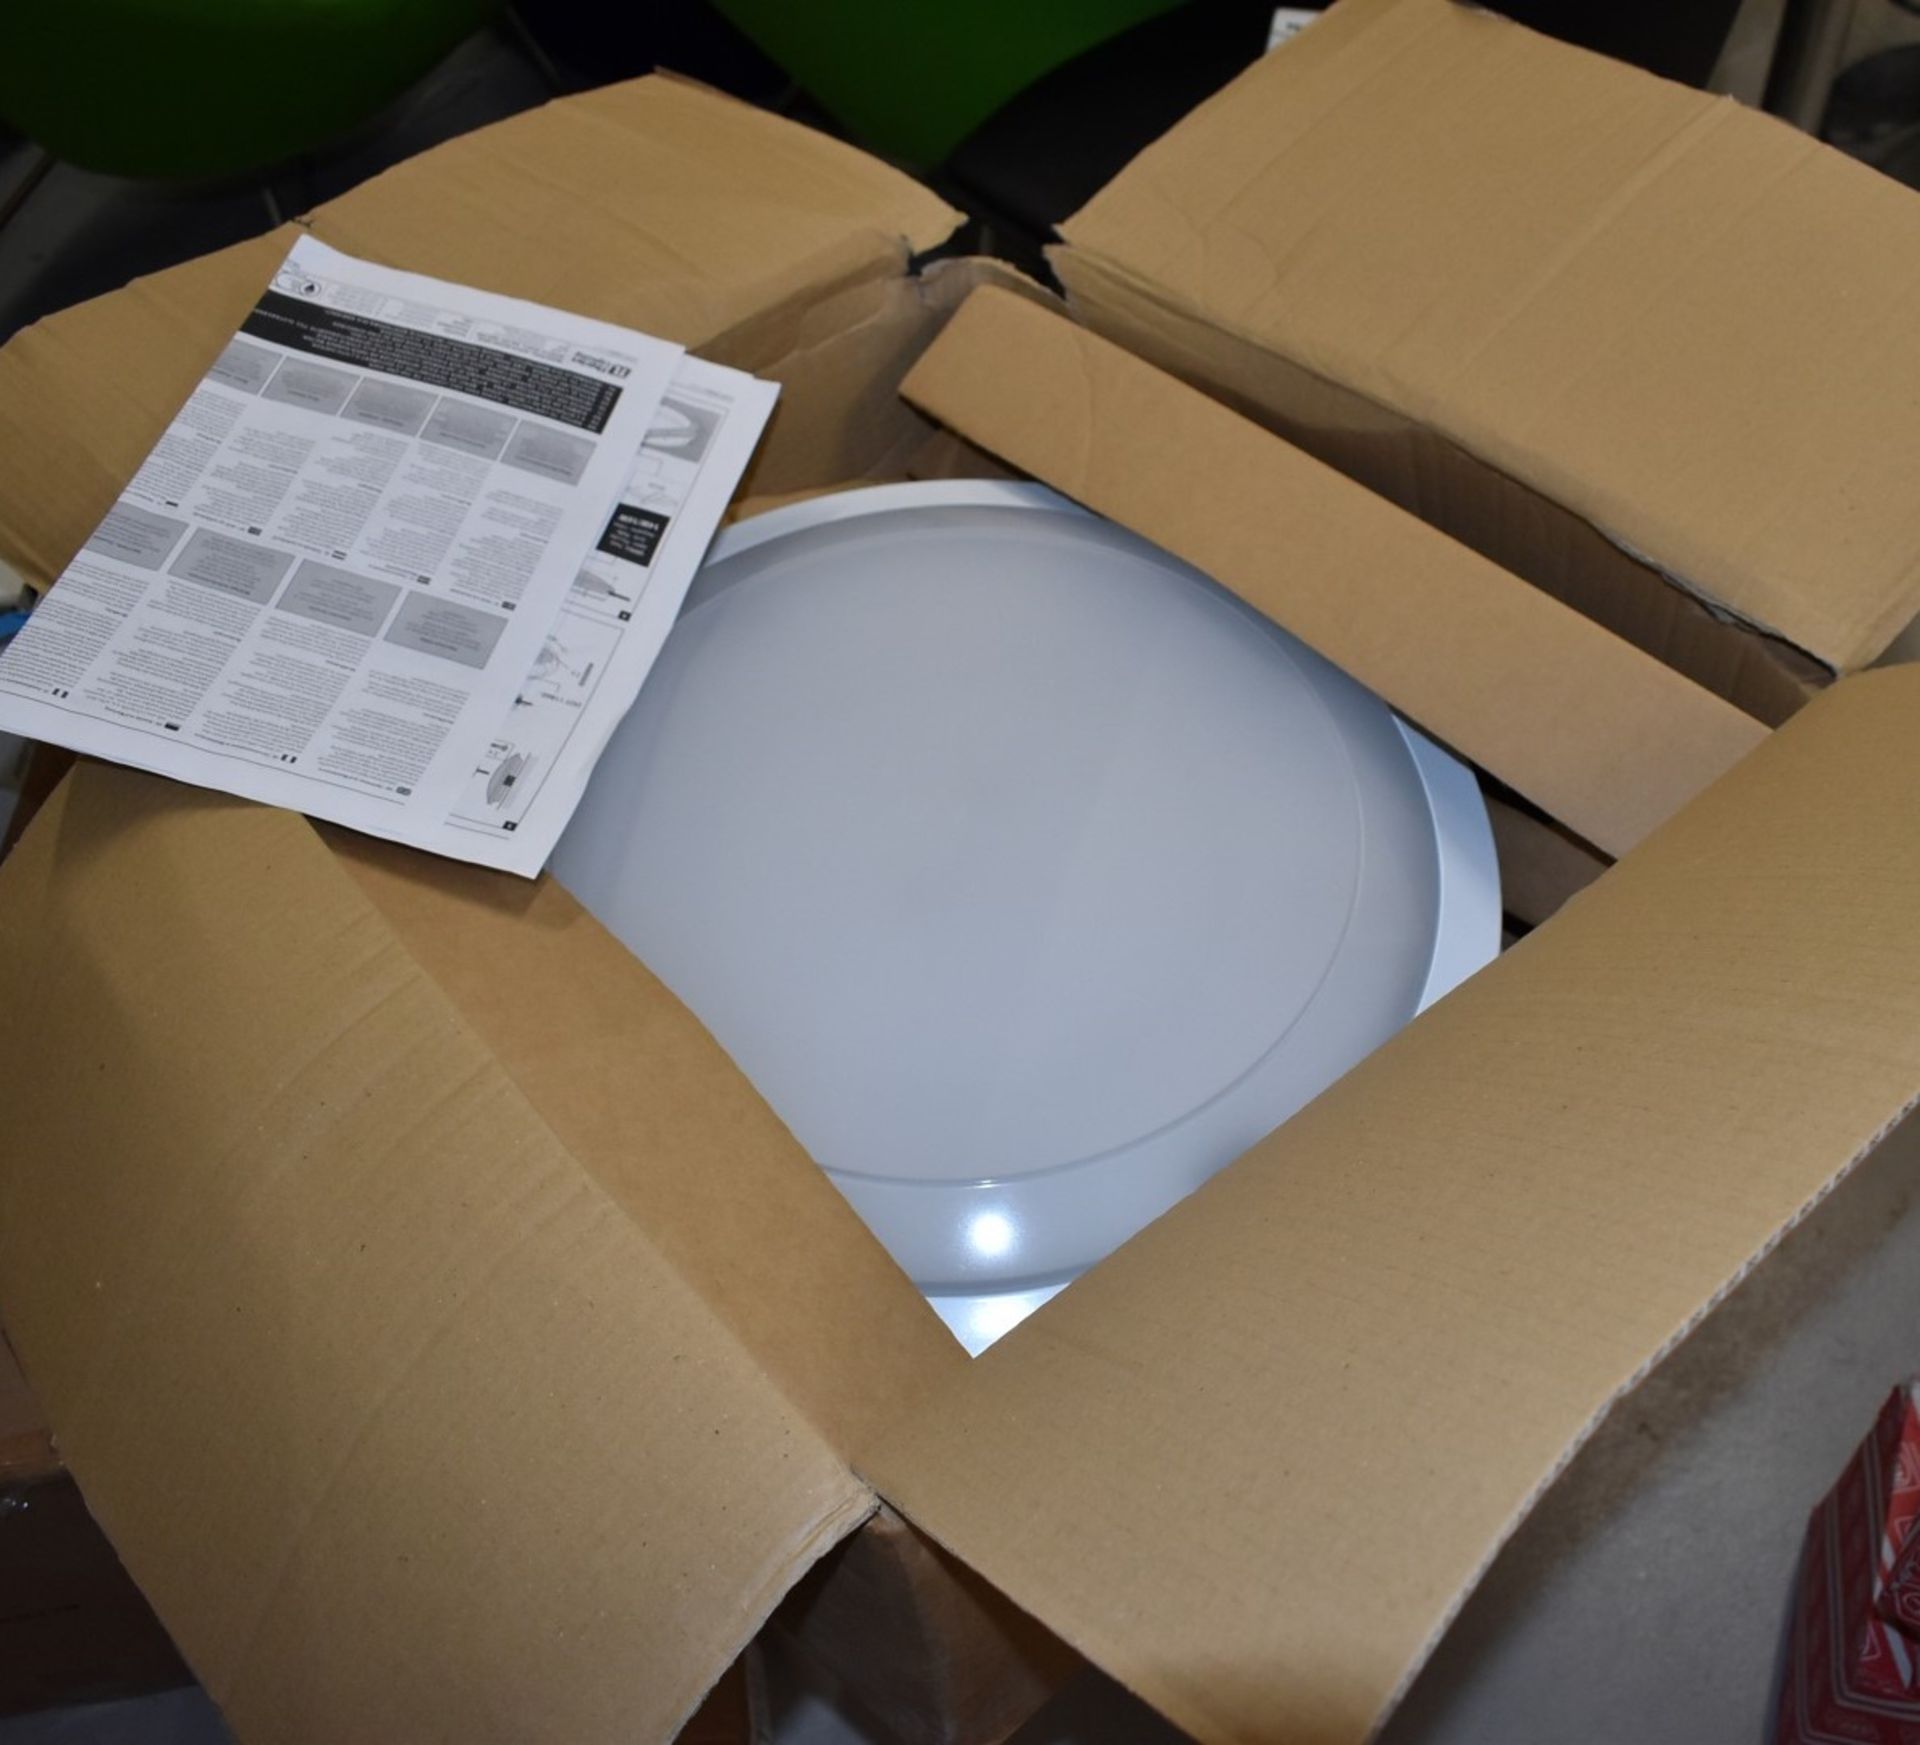 4 x Thorlux LED Ceiling Lights - Includes Two Boxes, Each Box Contains Two Lights